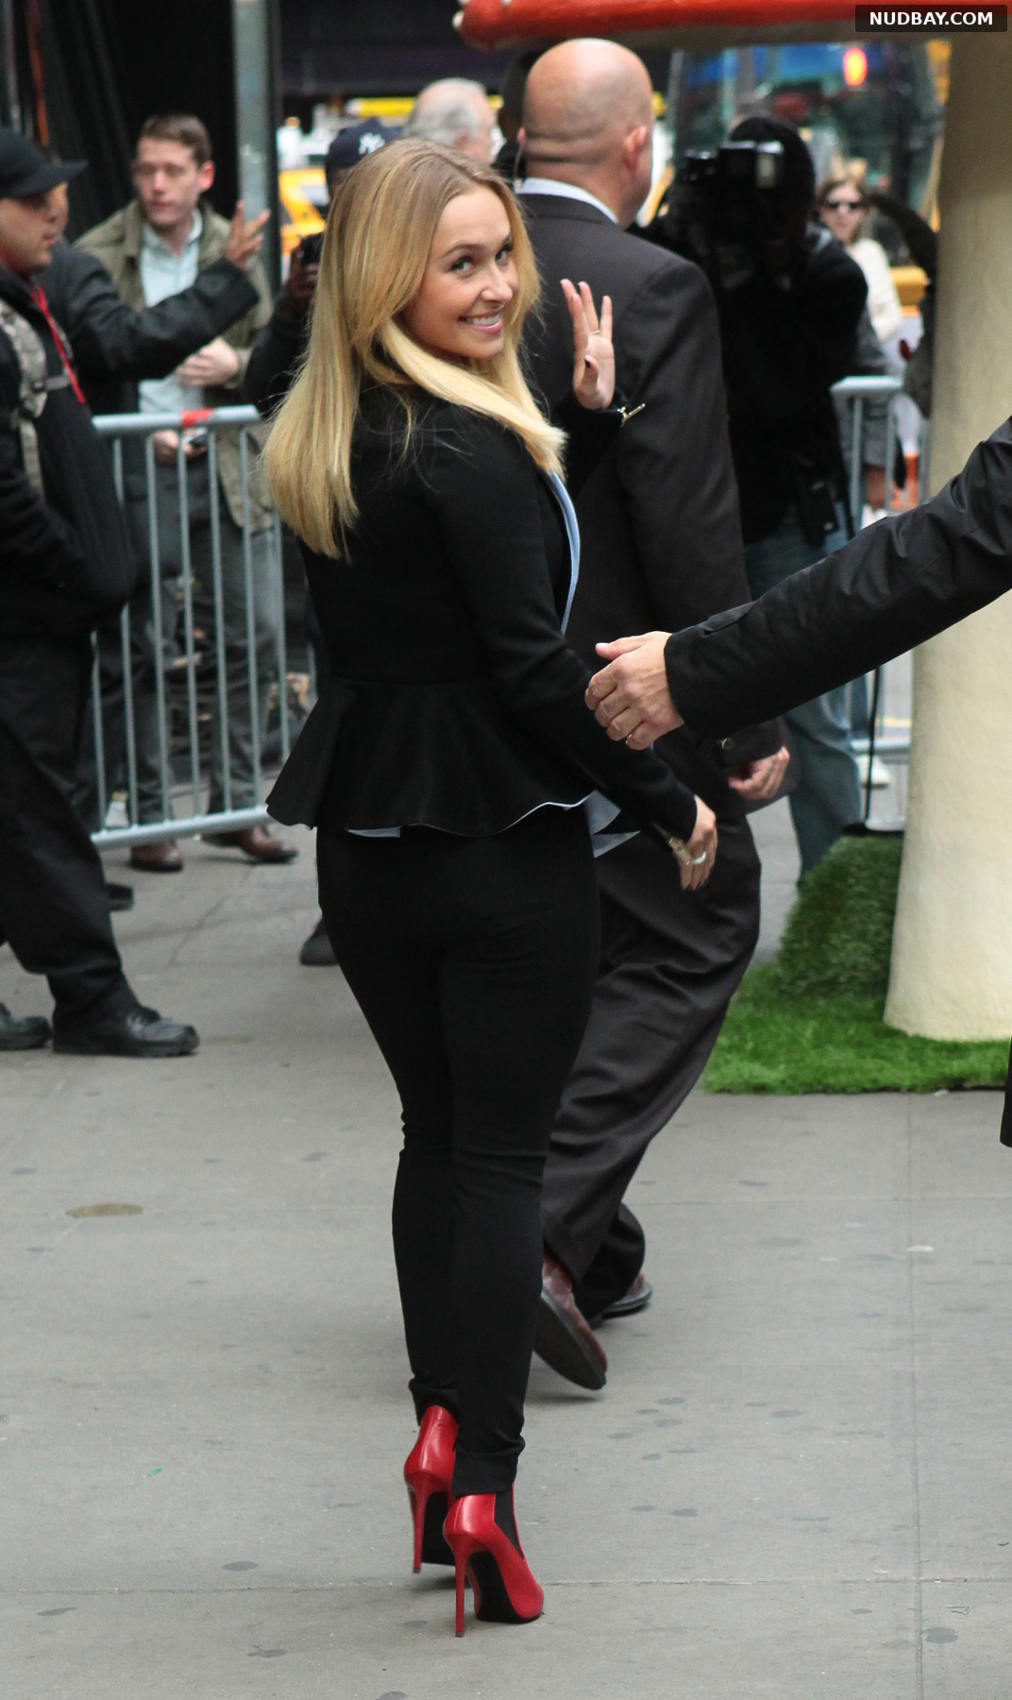 Hayden Panettiere Booty Good Morning America appearance at the ABC Studios October 9 2013